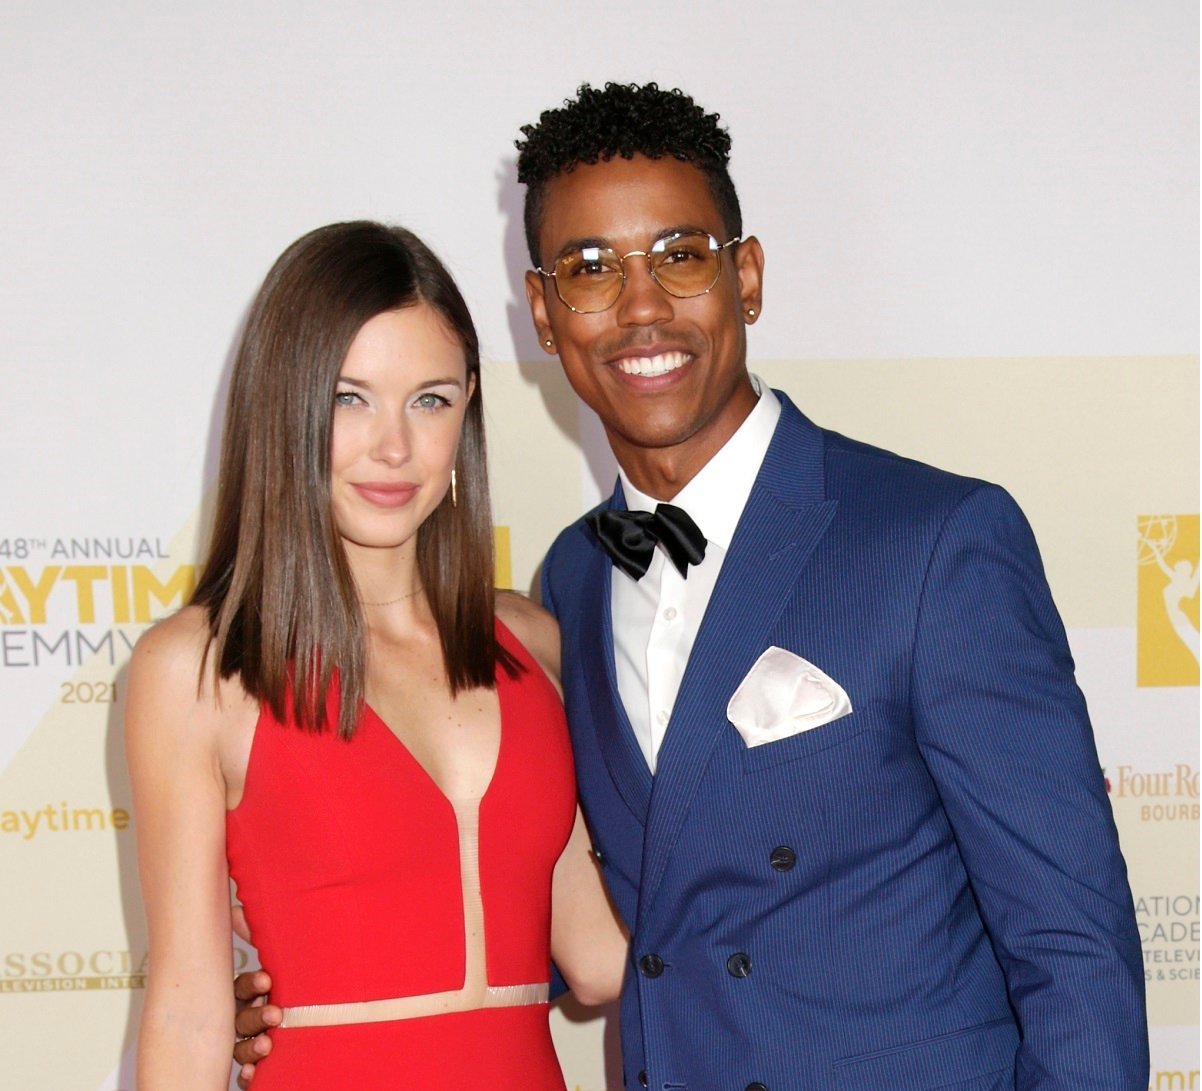 'General Hospital' stars Katelyn MacMullen and Tahj Bellow pose together for photographers on the red carpet.